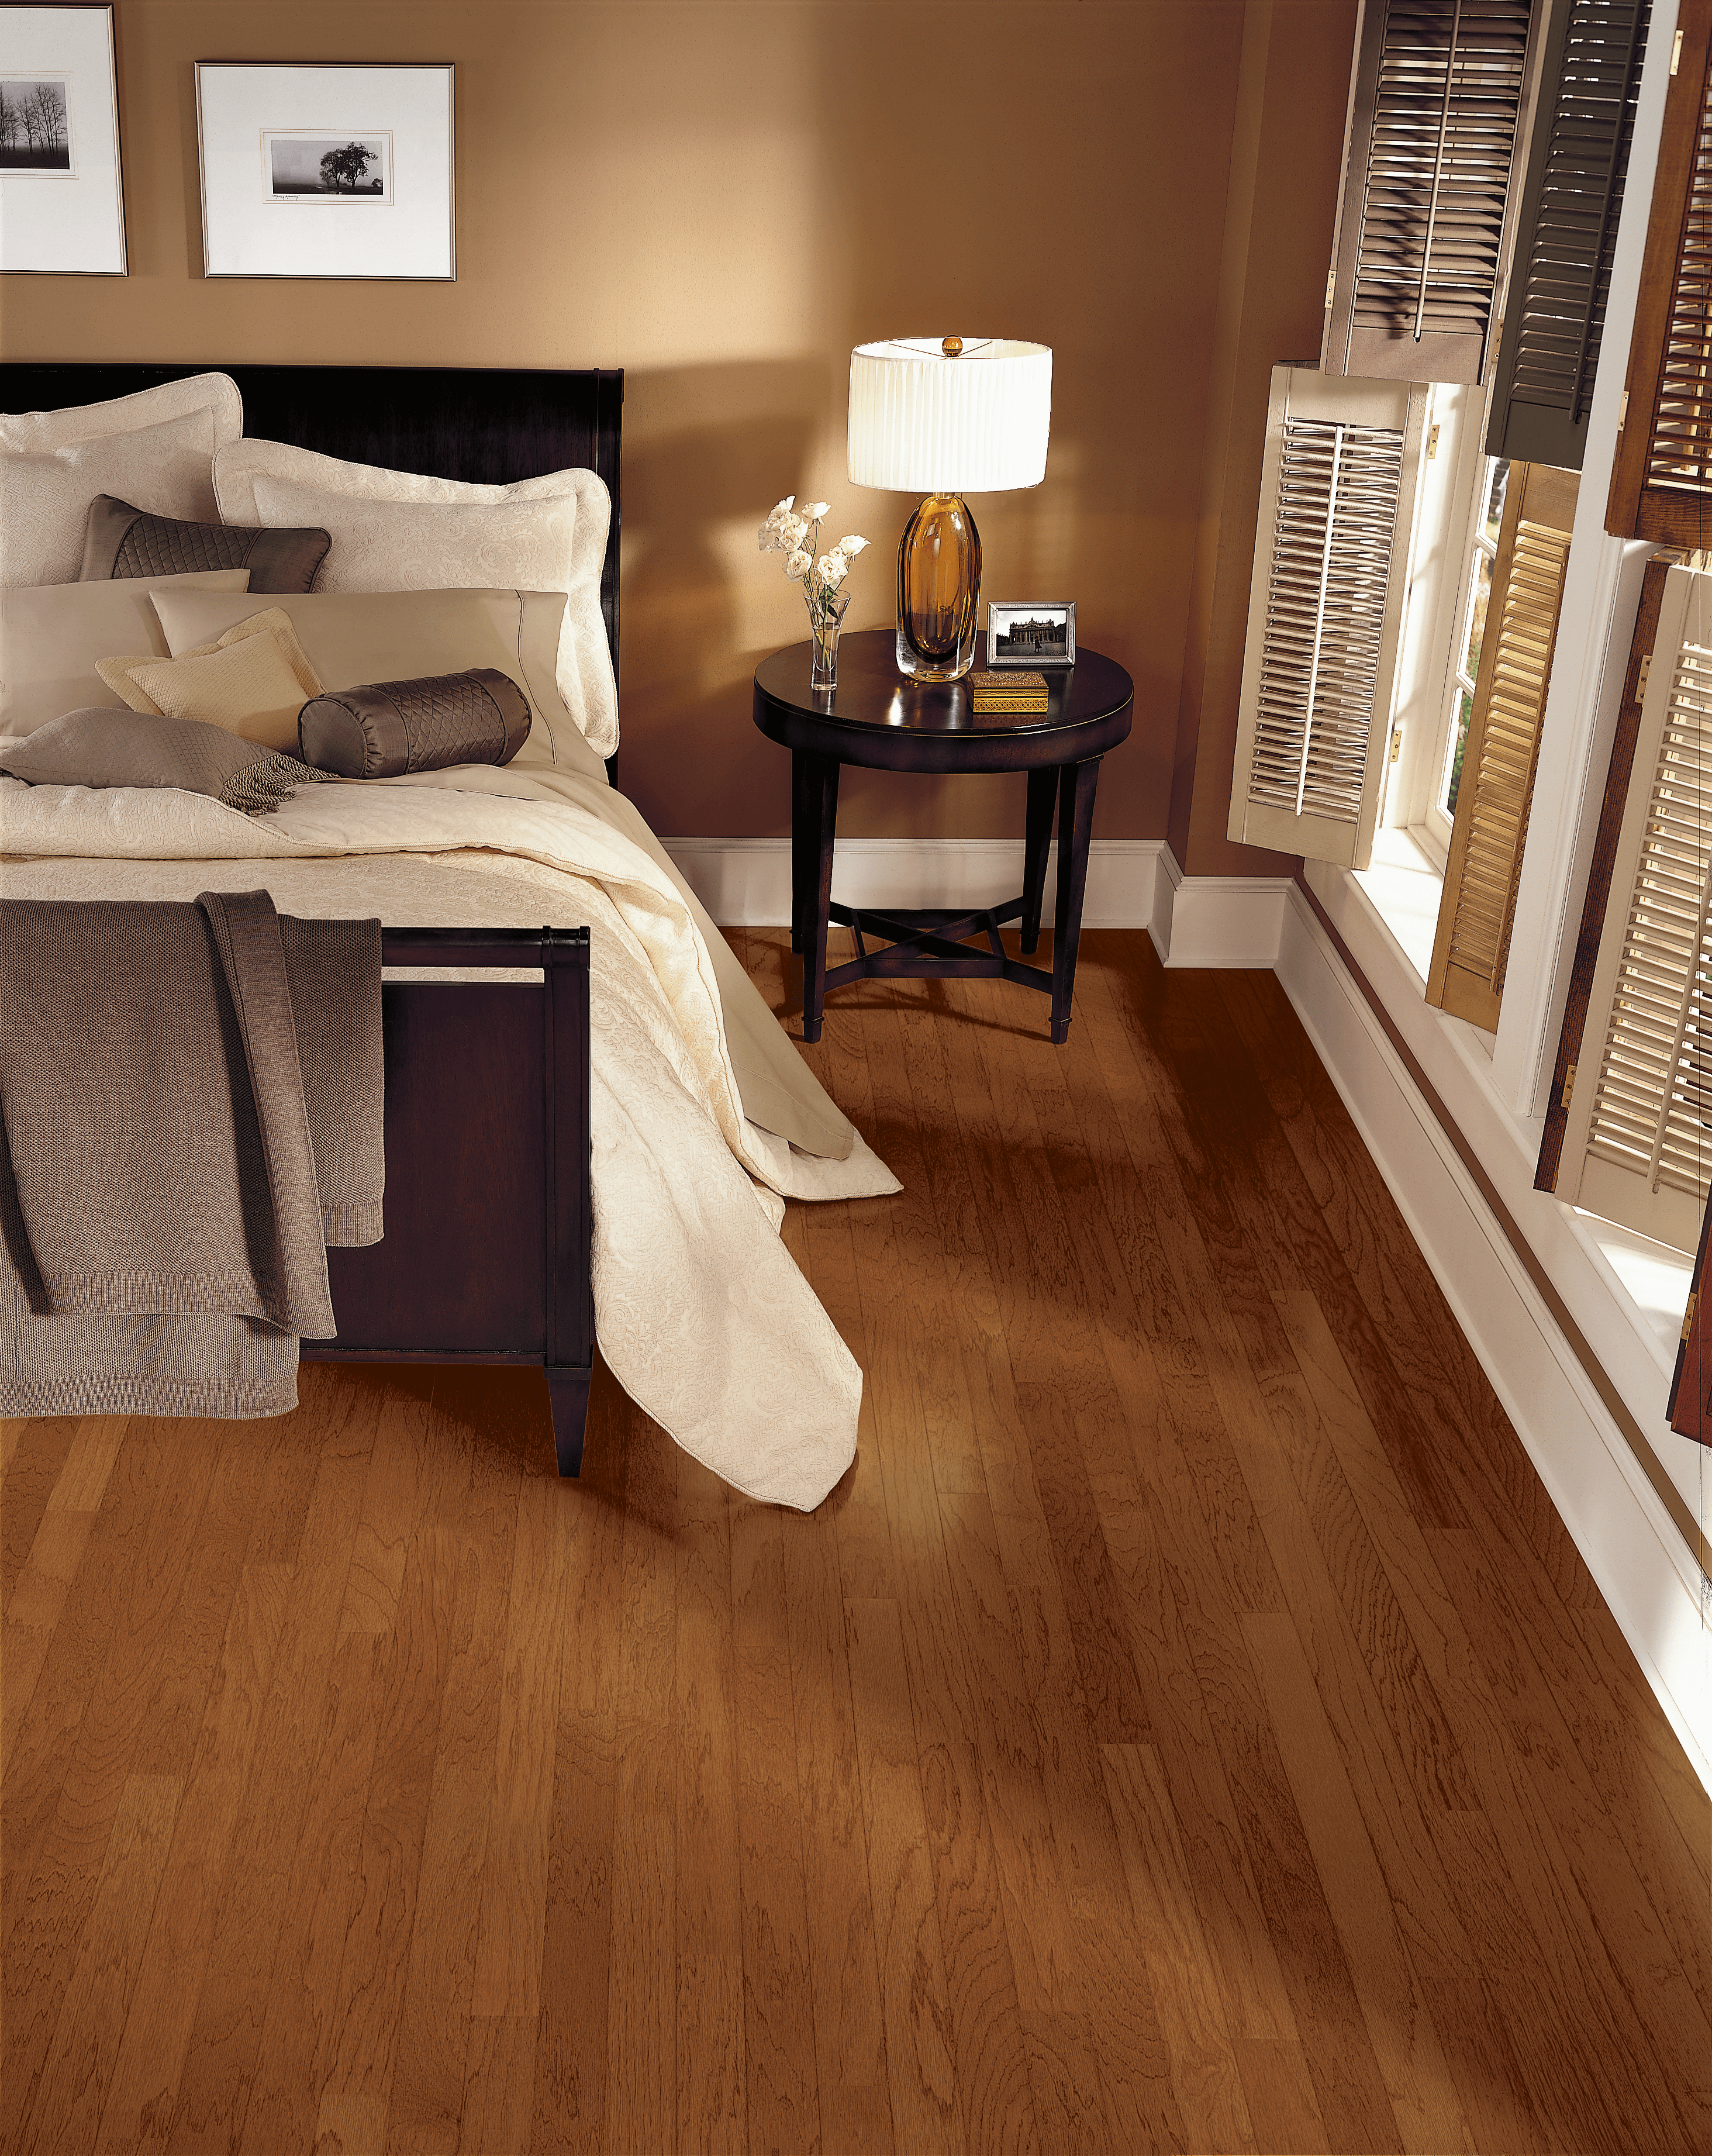 Bedroom with hickory engineered hardwood flooring from Bruce